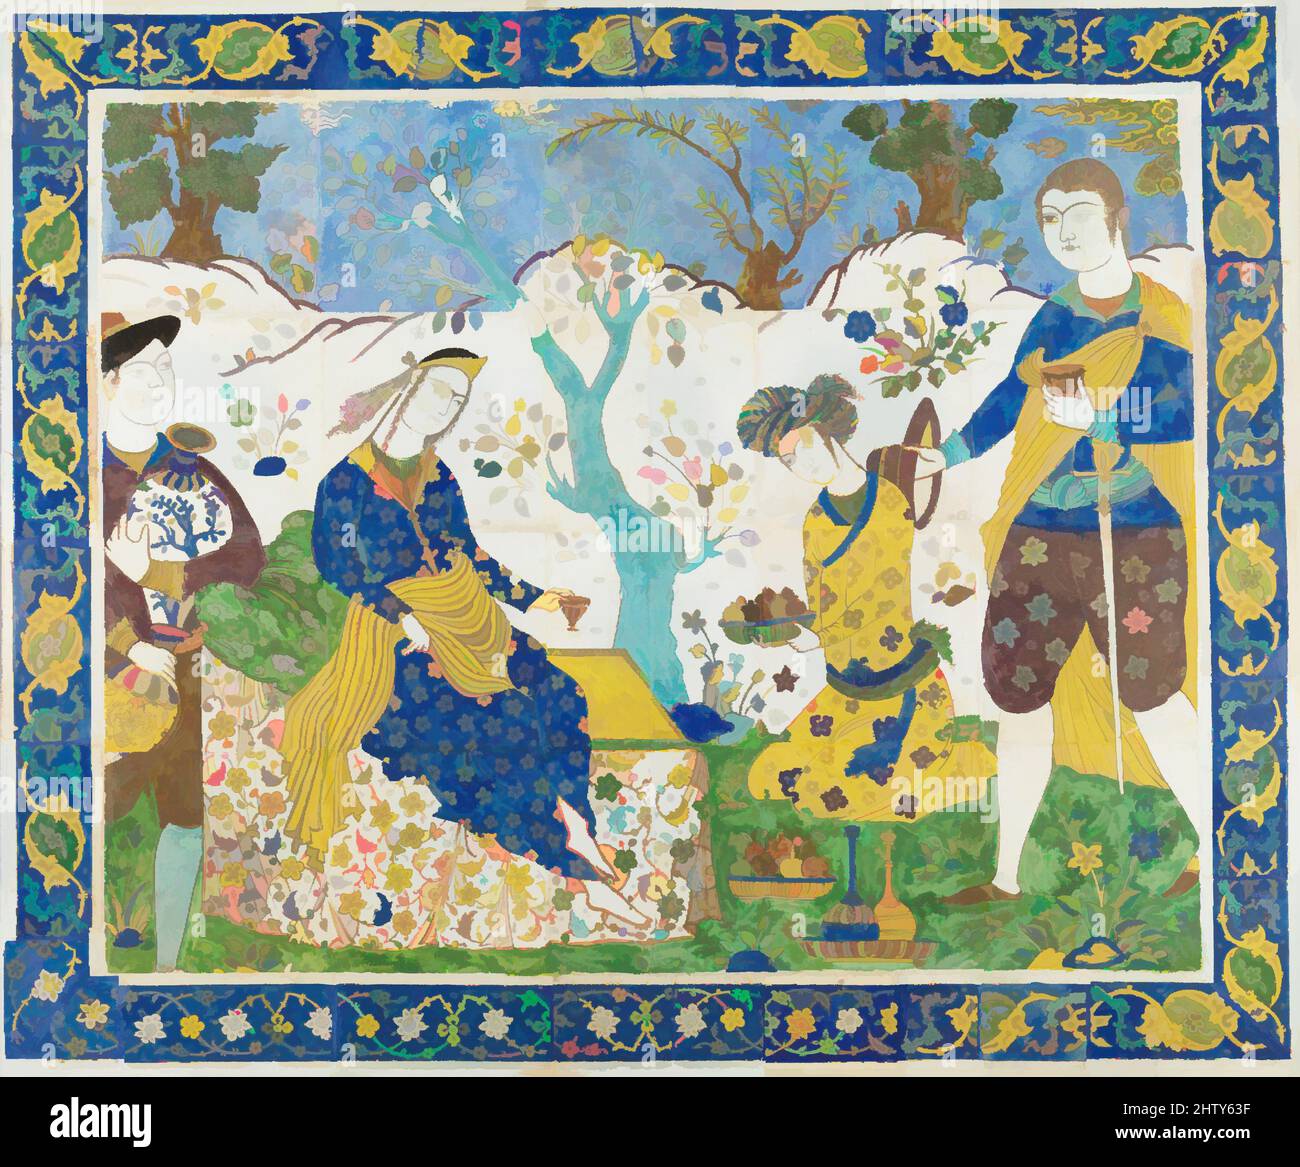 Art inspired by Tile Panel, first quarter 17th century, Attributed to Iran, probably Isfahan, Stonepaste; polychrome glazed within black wax resist outlines (cuerda seca technique), Panel: H. 45 1/2 in. (115.6 cm), Ceramics-Tiles, Isfahan, the Safavid capital, and Na'in were the two, Classic works modernized by Artotop with a splash of modernity. Shapes, color and value, eye-catching visual impact on art. Emotions through freedom of artworks in a contemporary way. A timeless message pursuing a wildly creative new direction. Artists turning to the digital medium and creating the Artotop NFT Stock Photo